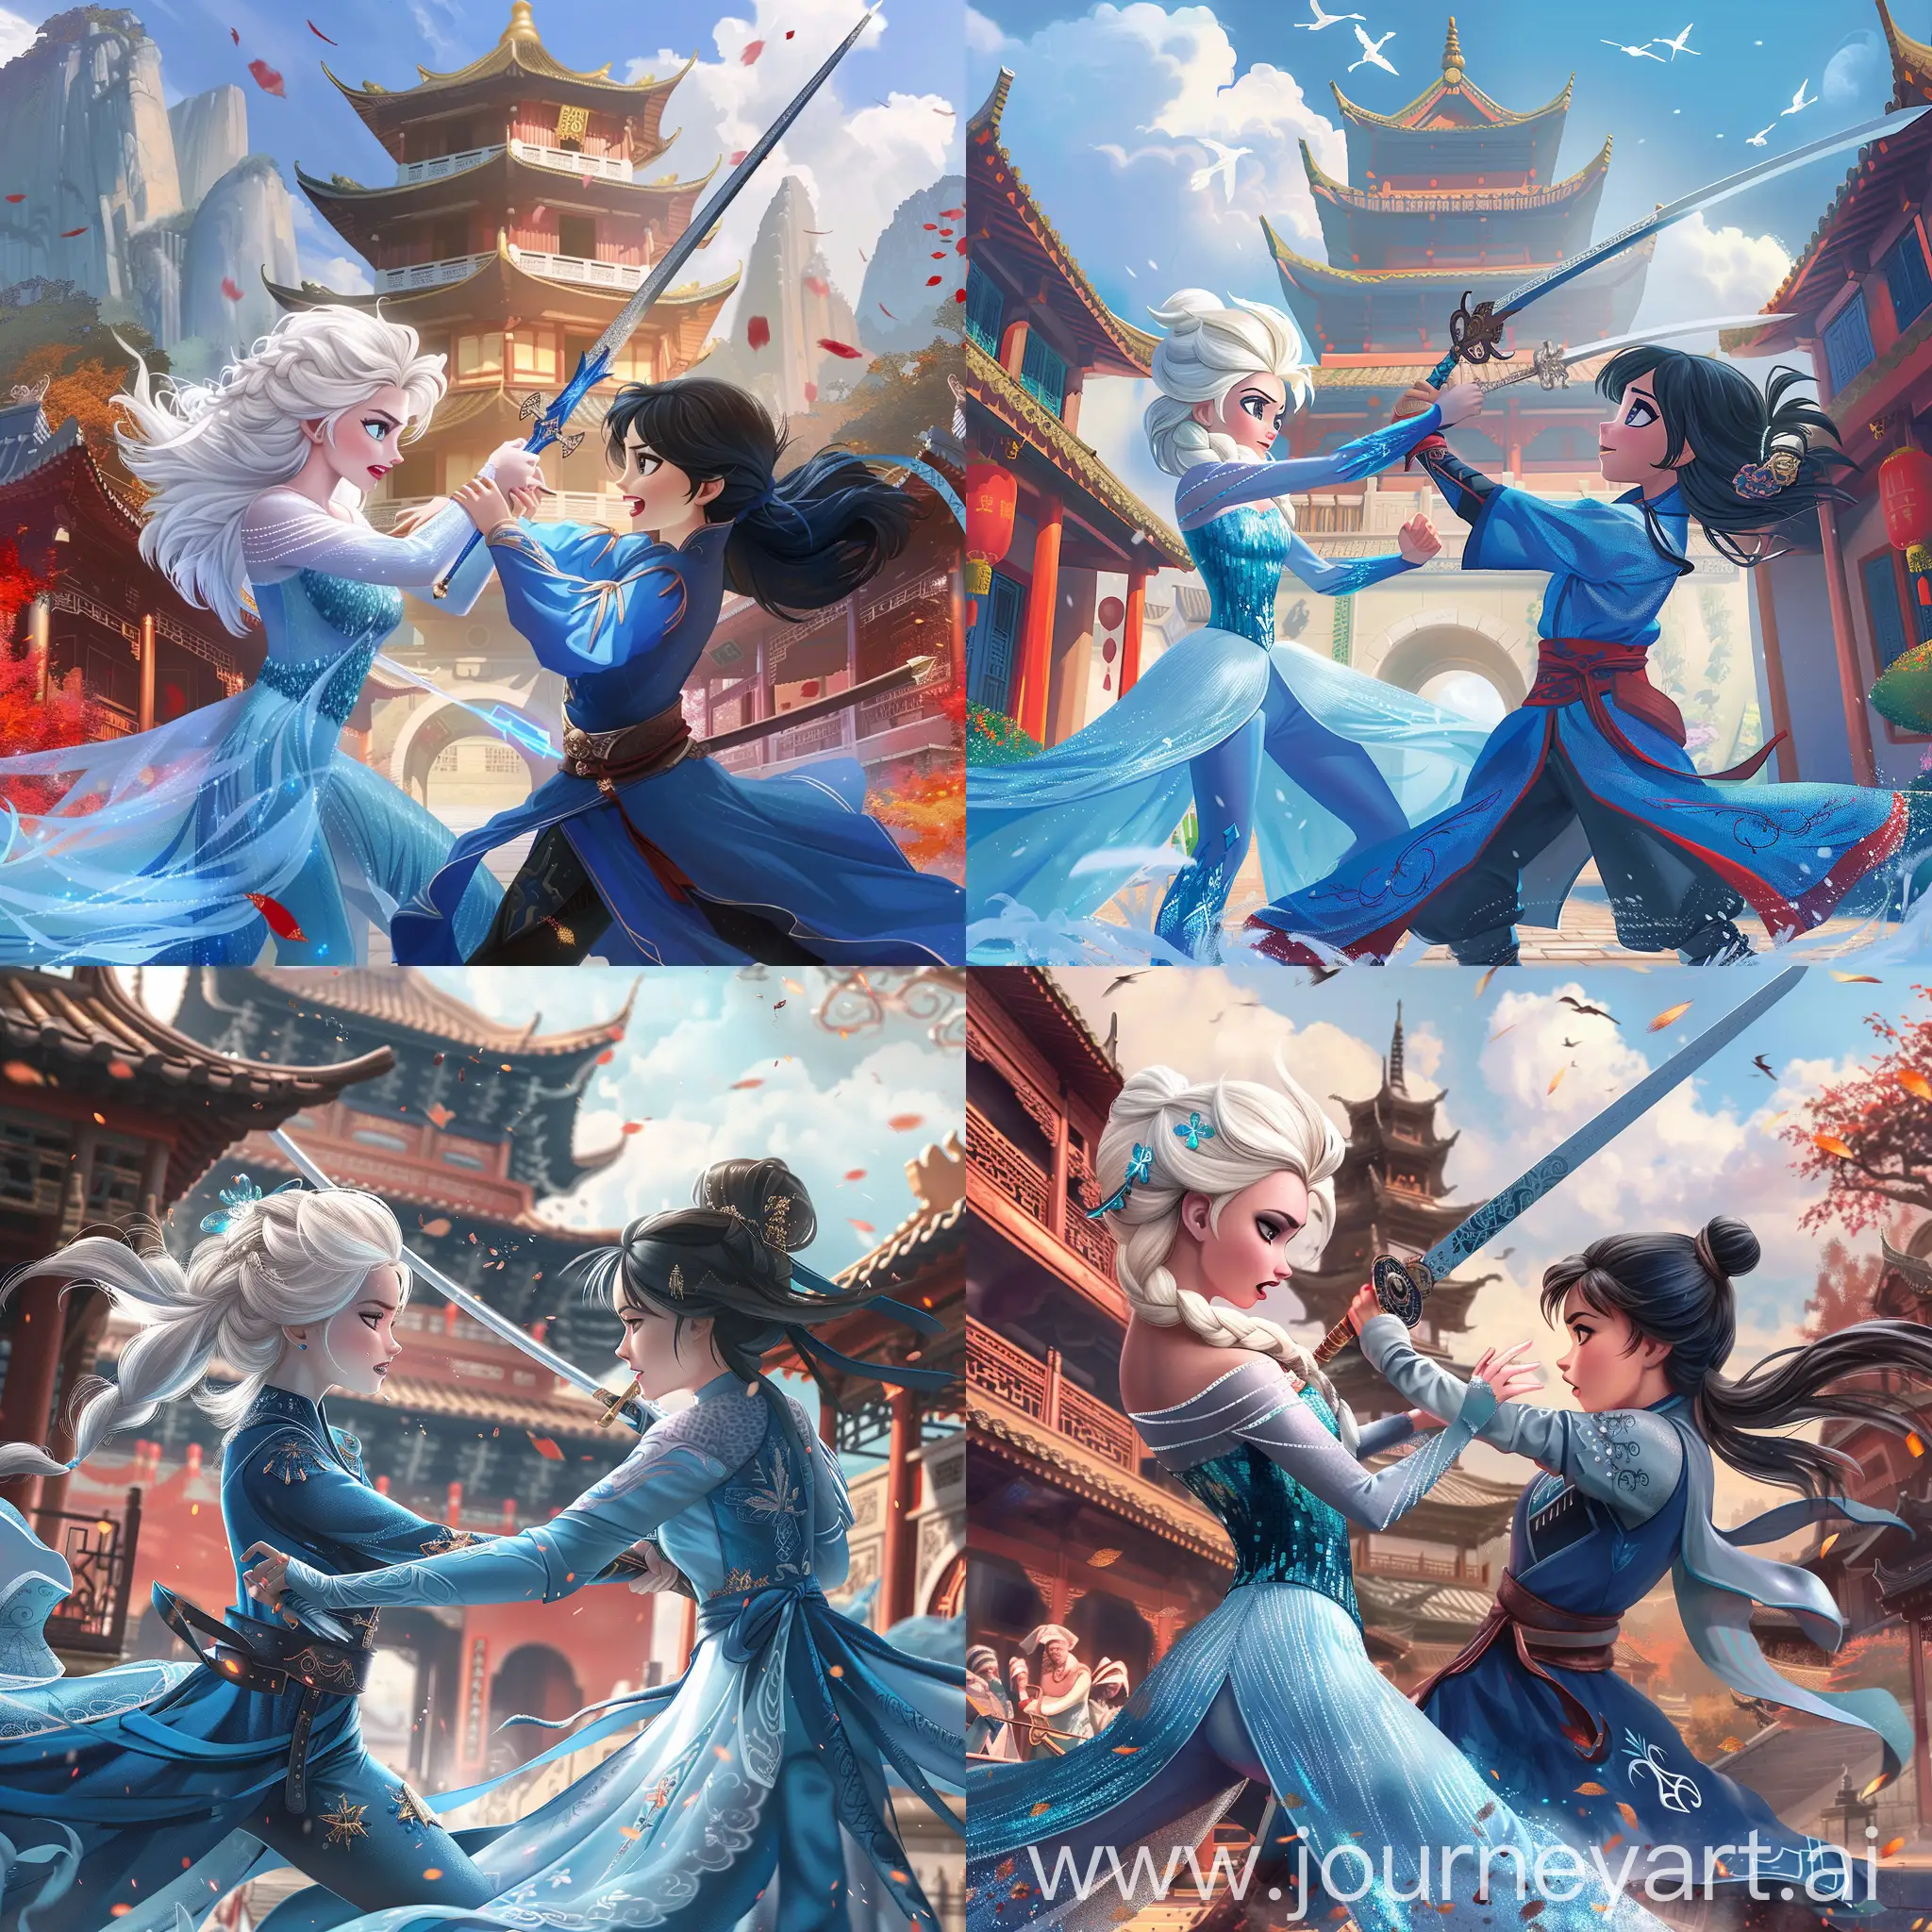 a white hair Princess Elsa is fighting against a black hair Princess snow white, they both have Chinese swords in their hands,

they are both in blue color beautiful Chinese female medieval costume Hanfu,

a chinese temple is behind them,